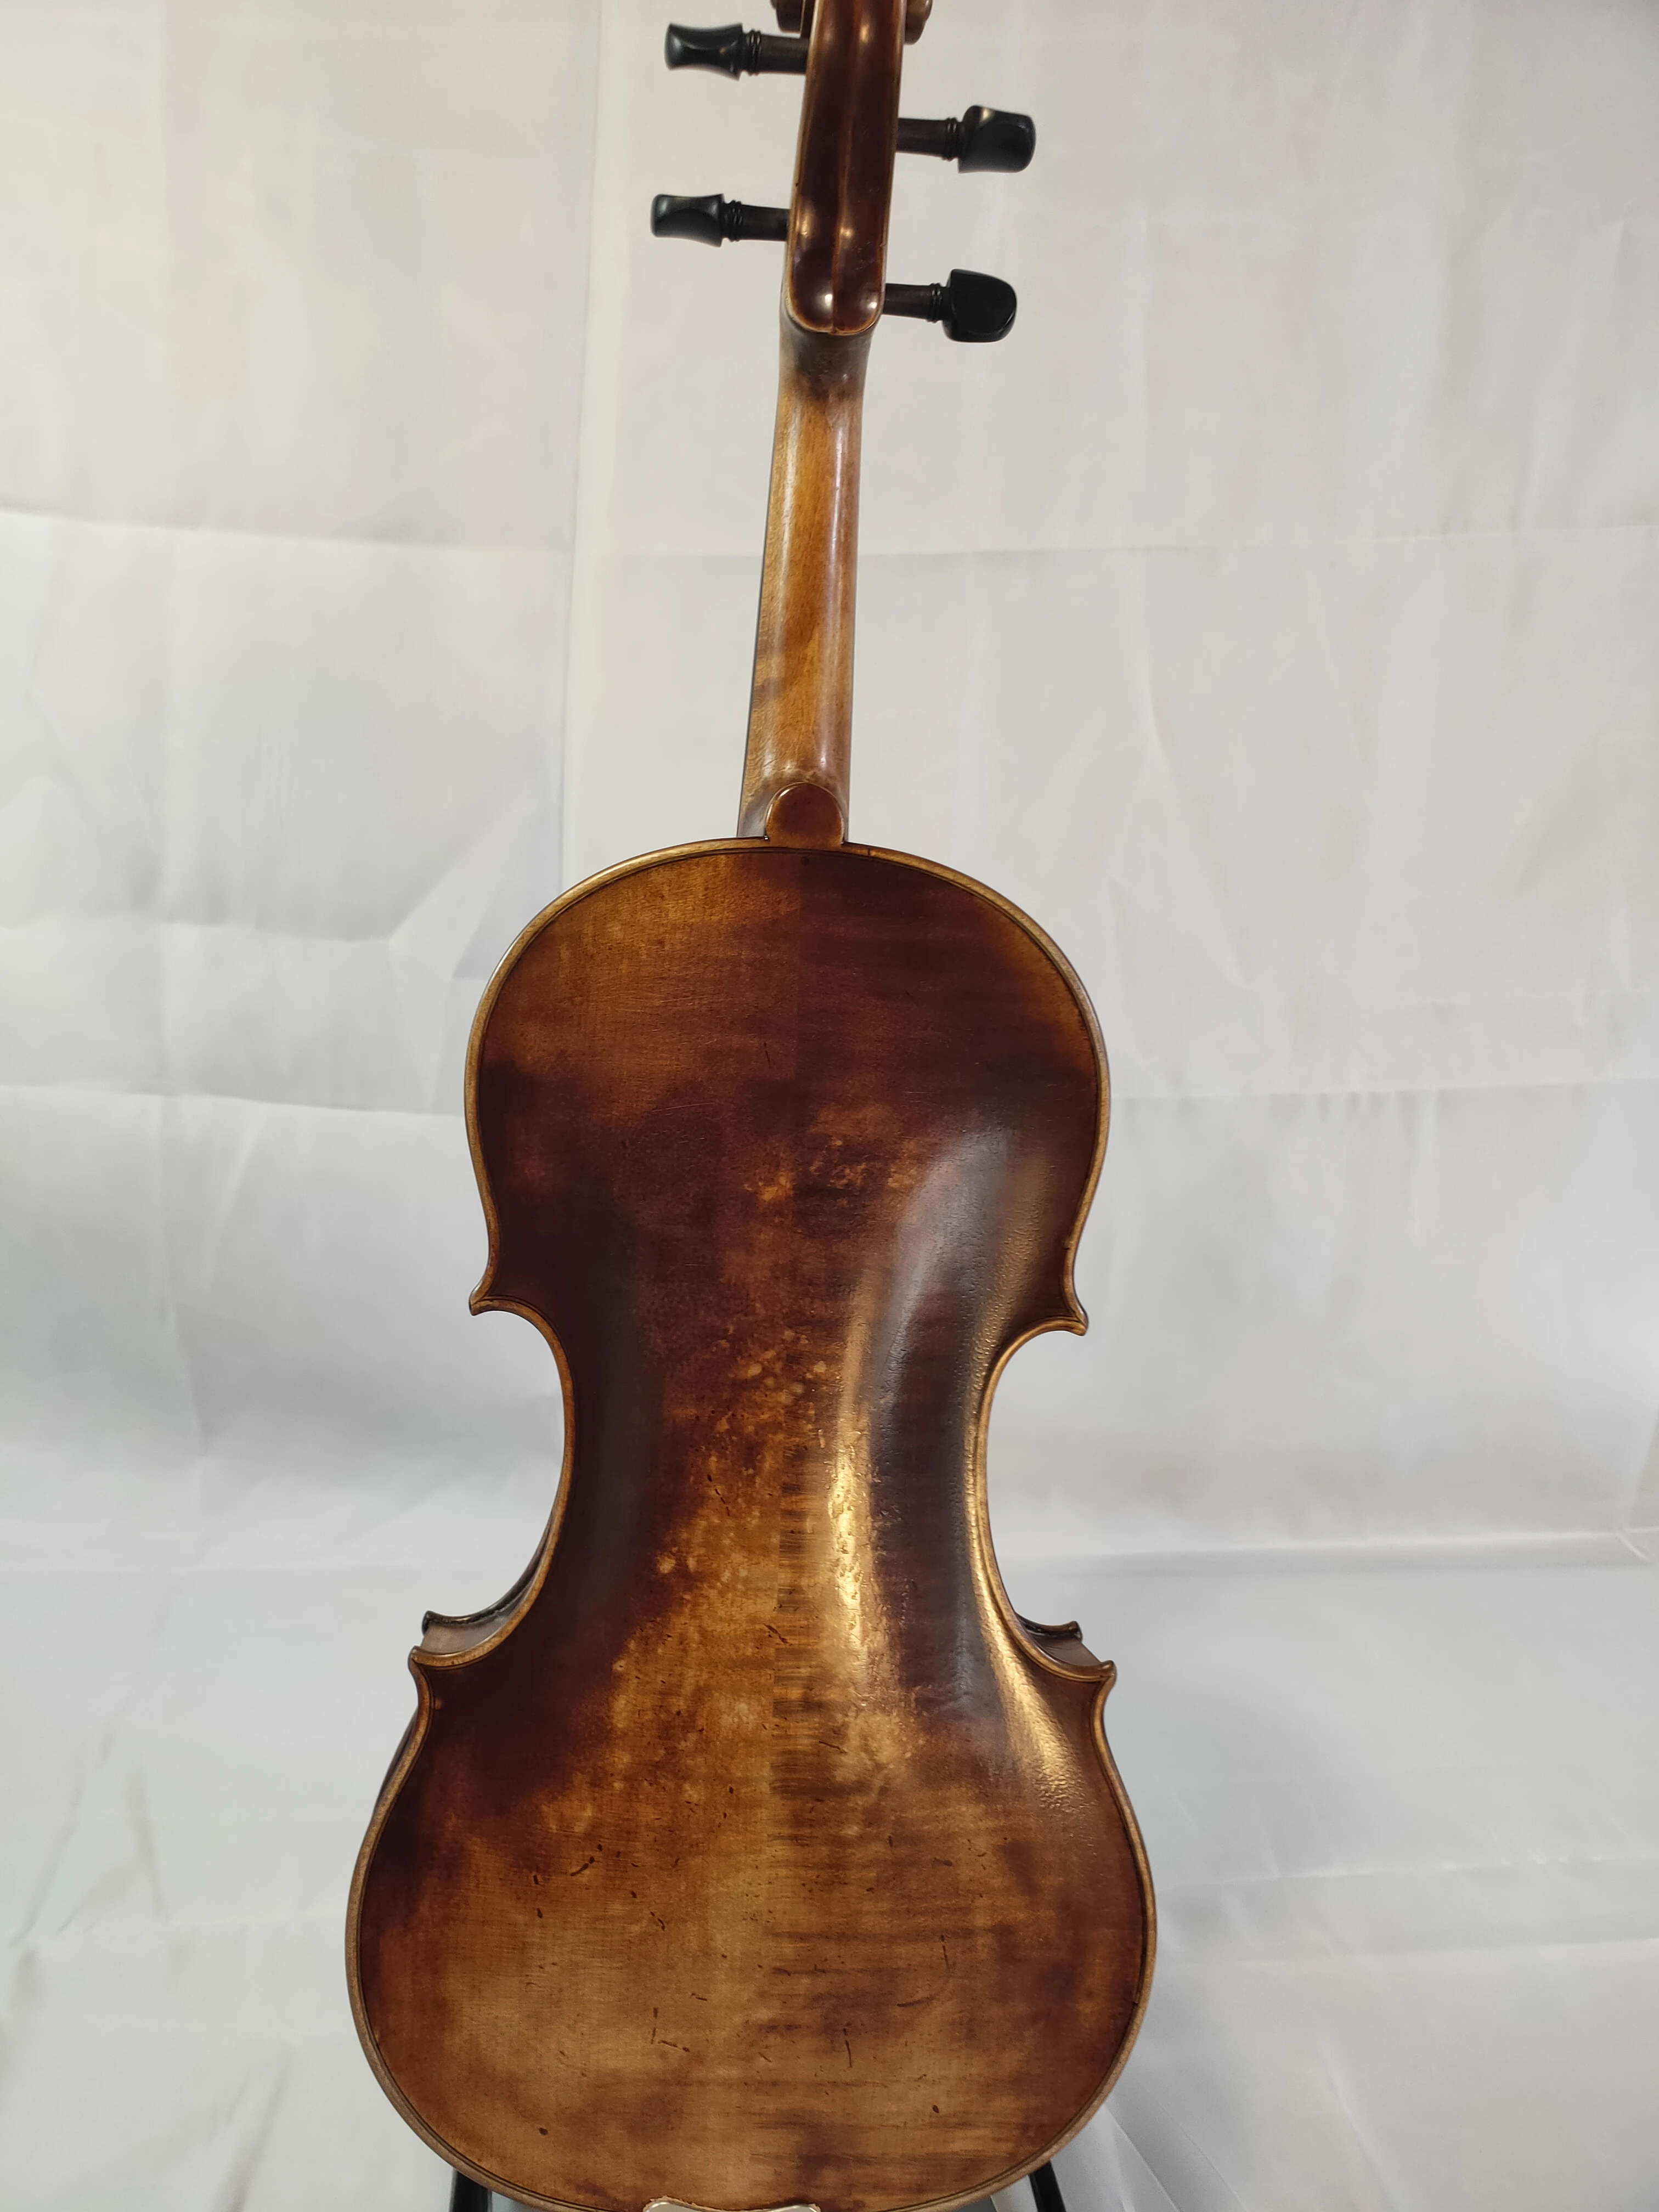 Chinese musical instrument manufacturer high quality students violin with free violin case/bow/rosin